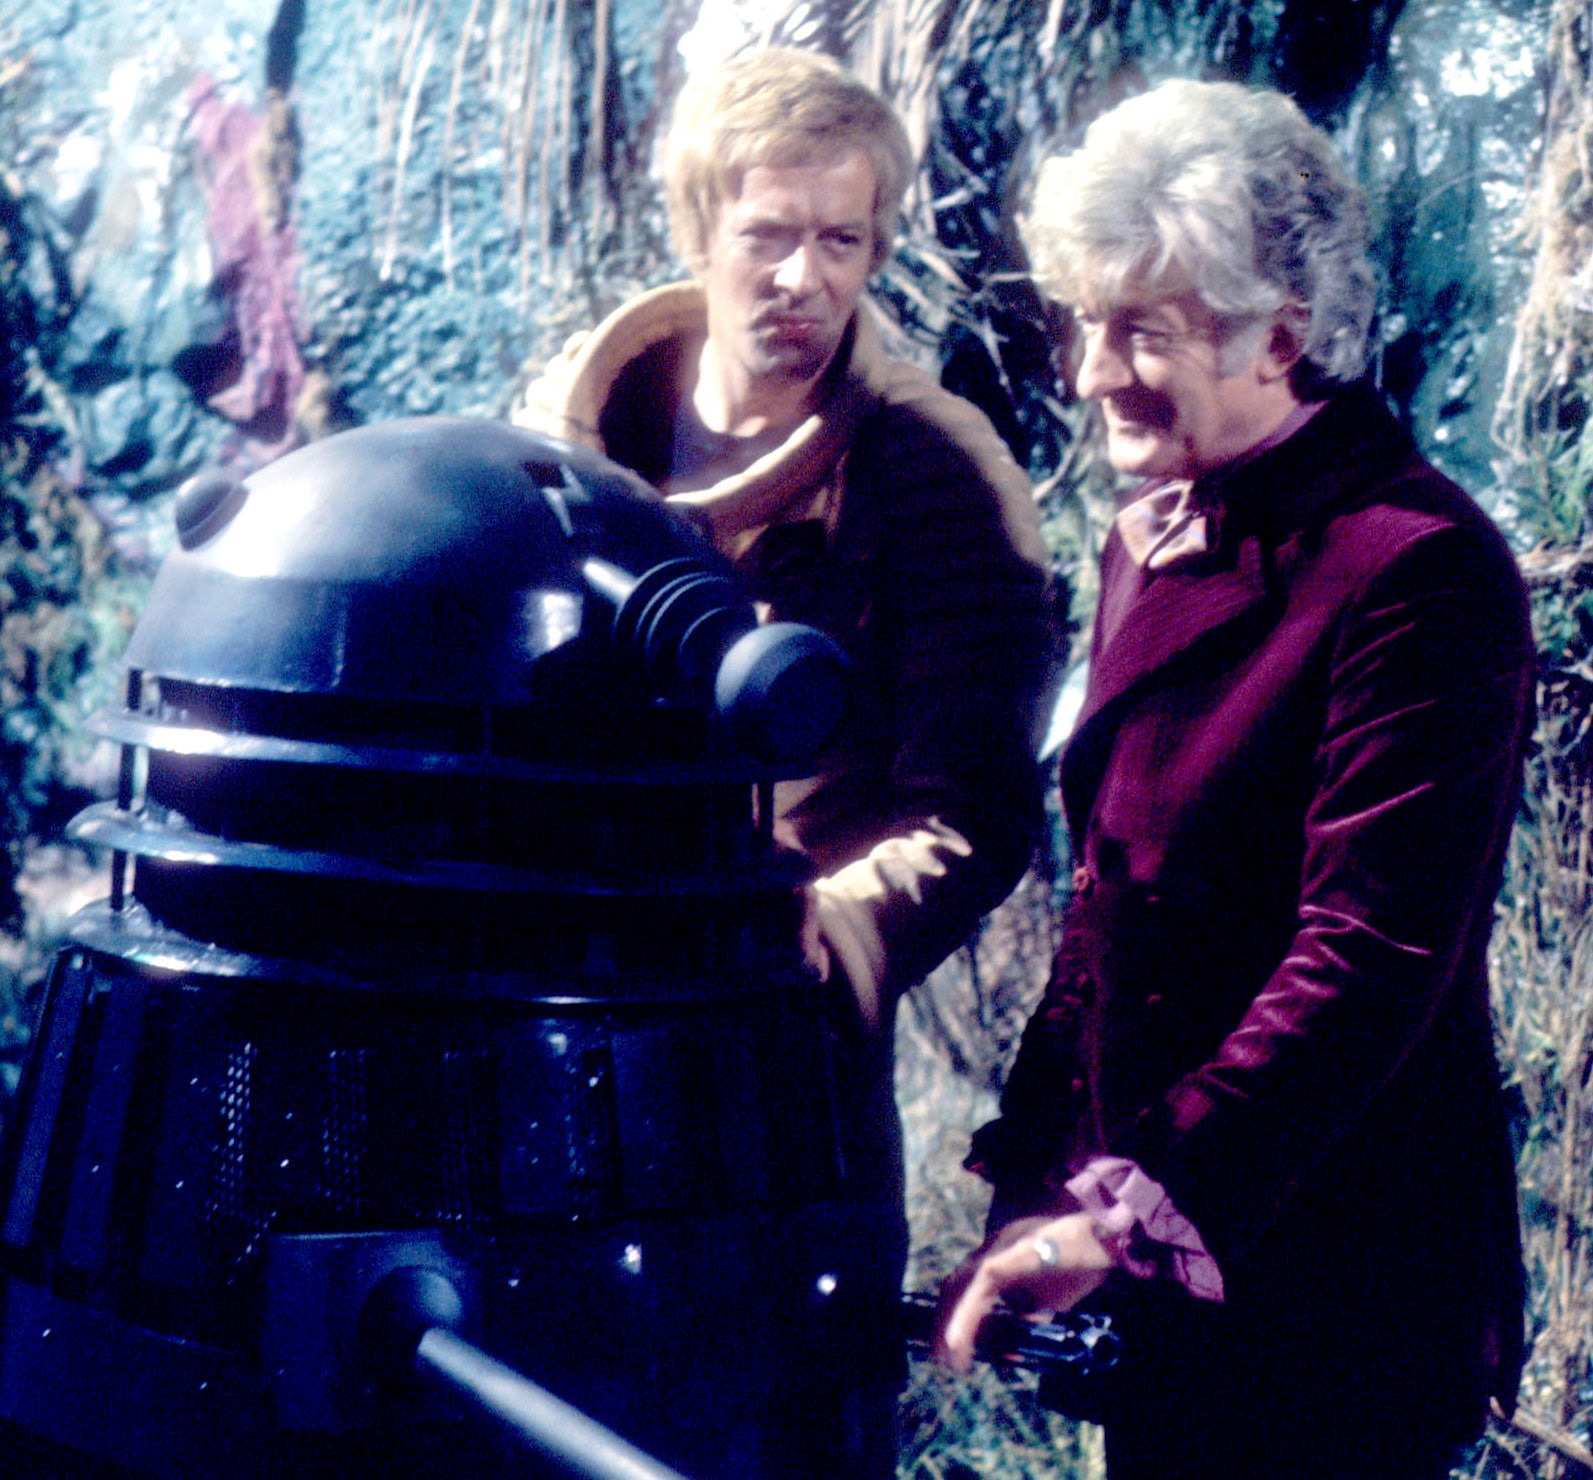 Image of Jon Pertwee as The Third Doctor with a dalek